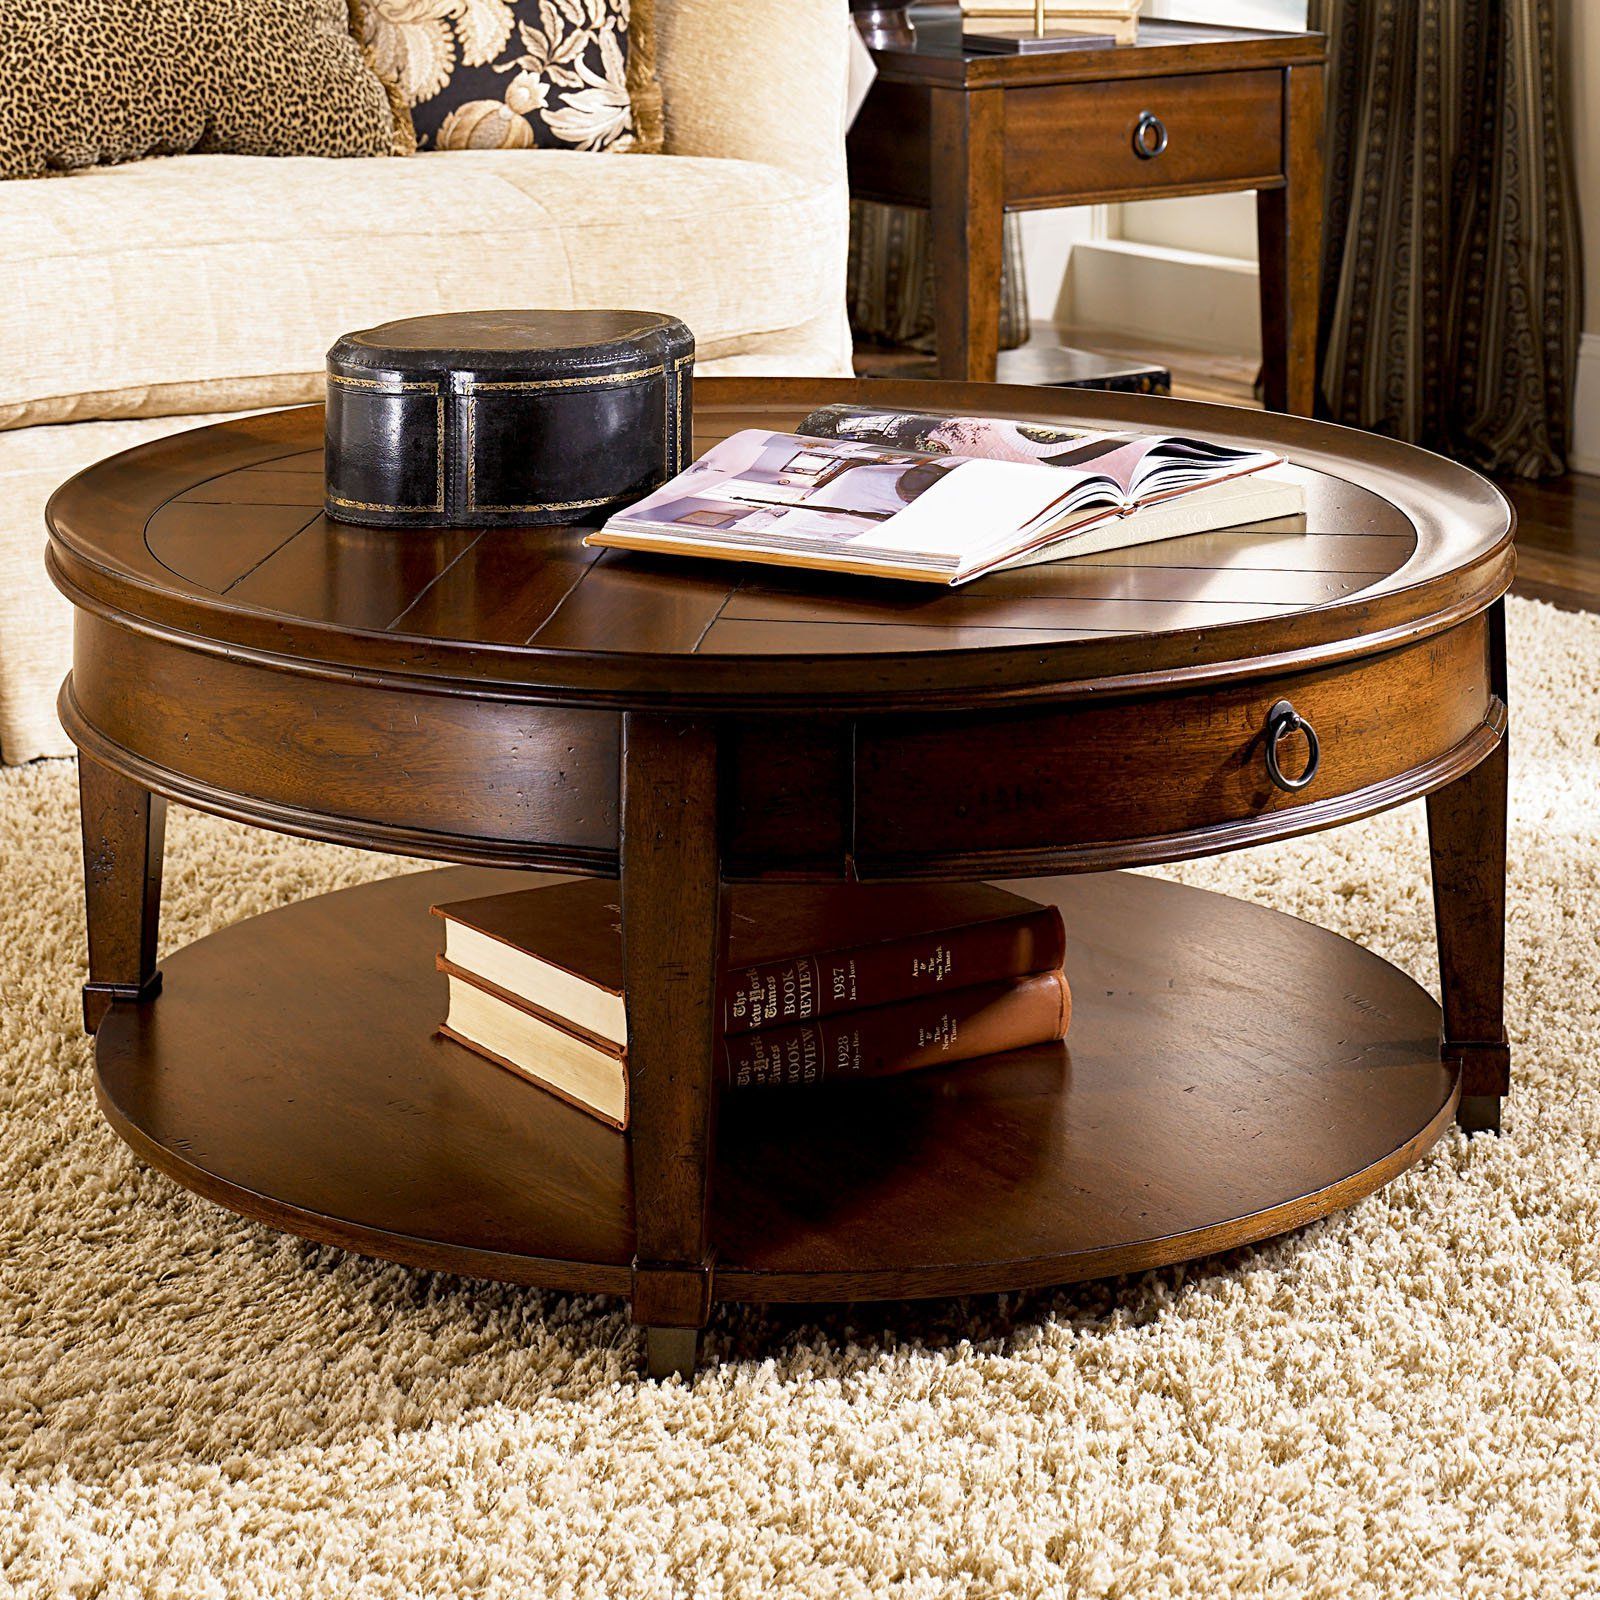 Hammary Sunset Valley Round Cocktail Table – Rich Mahogany | Mahogany Inside Round Coffee Tables With Storage (View 15 of 20)